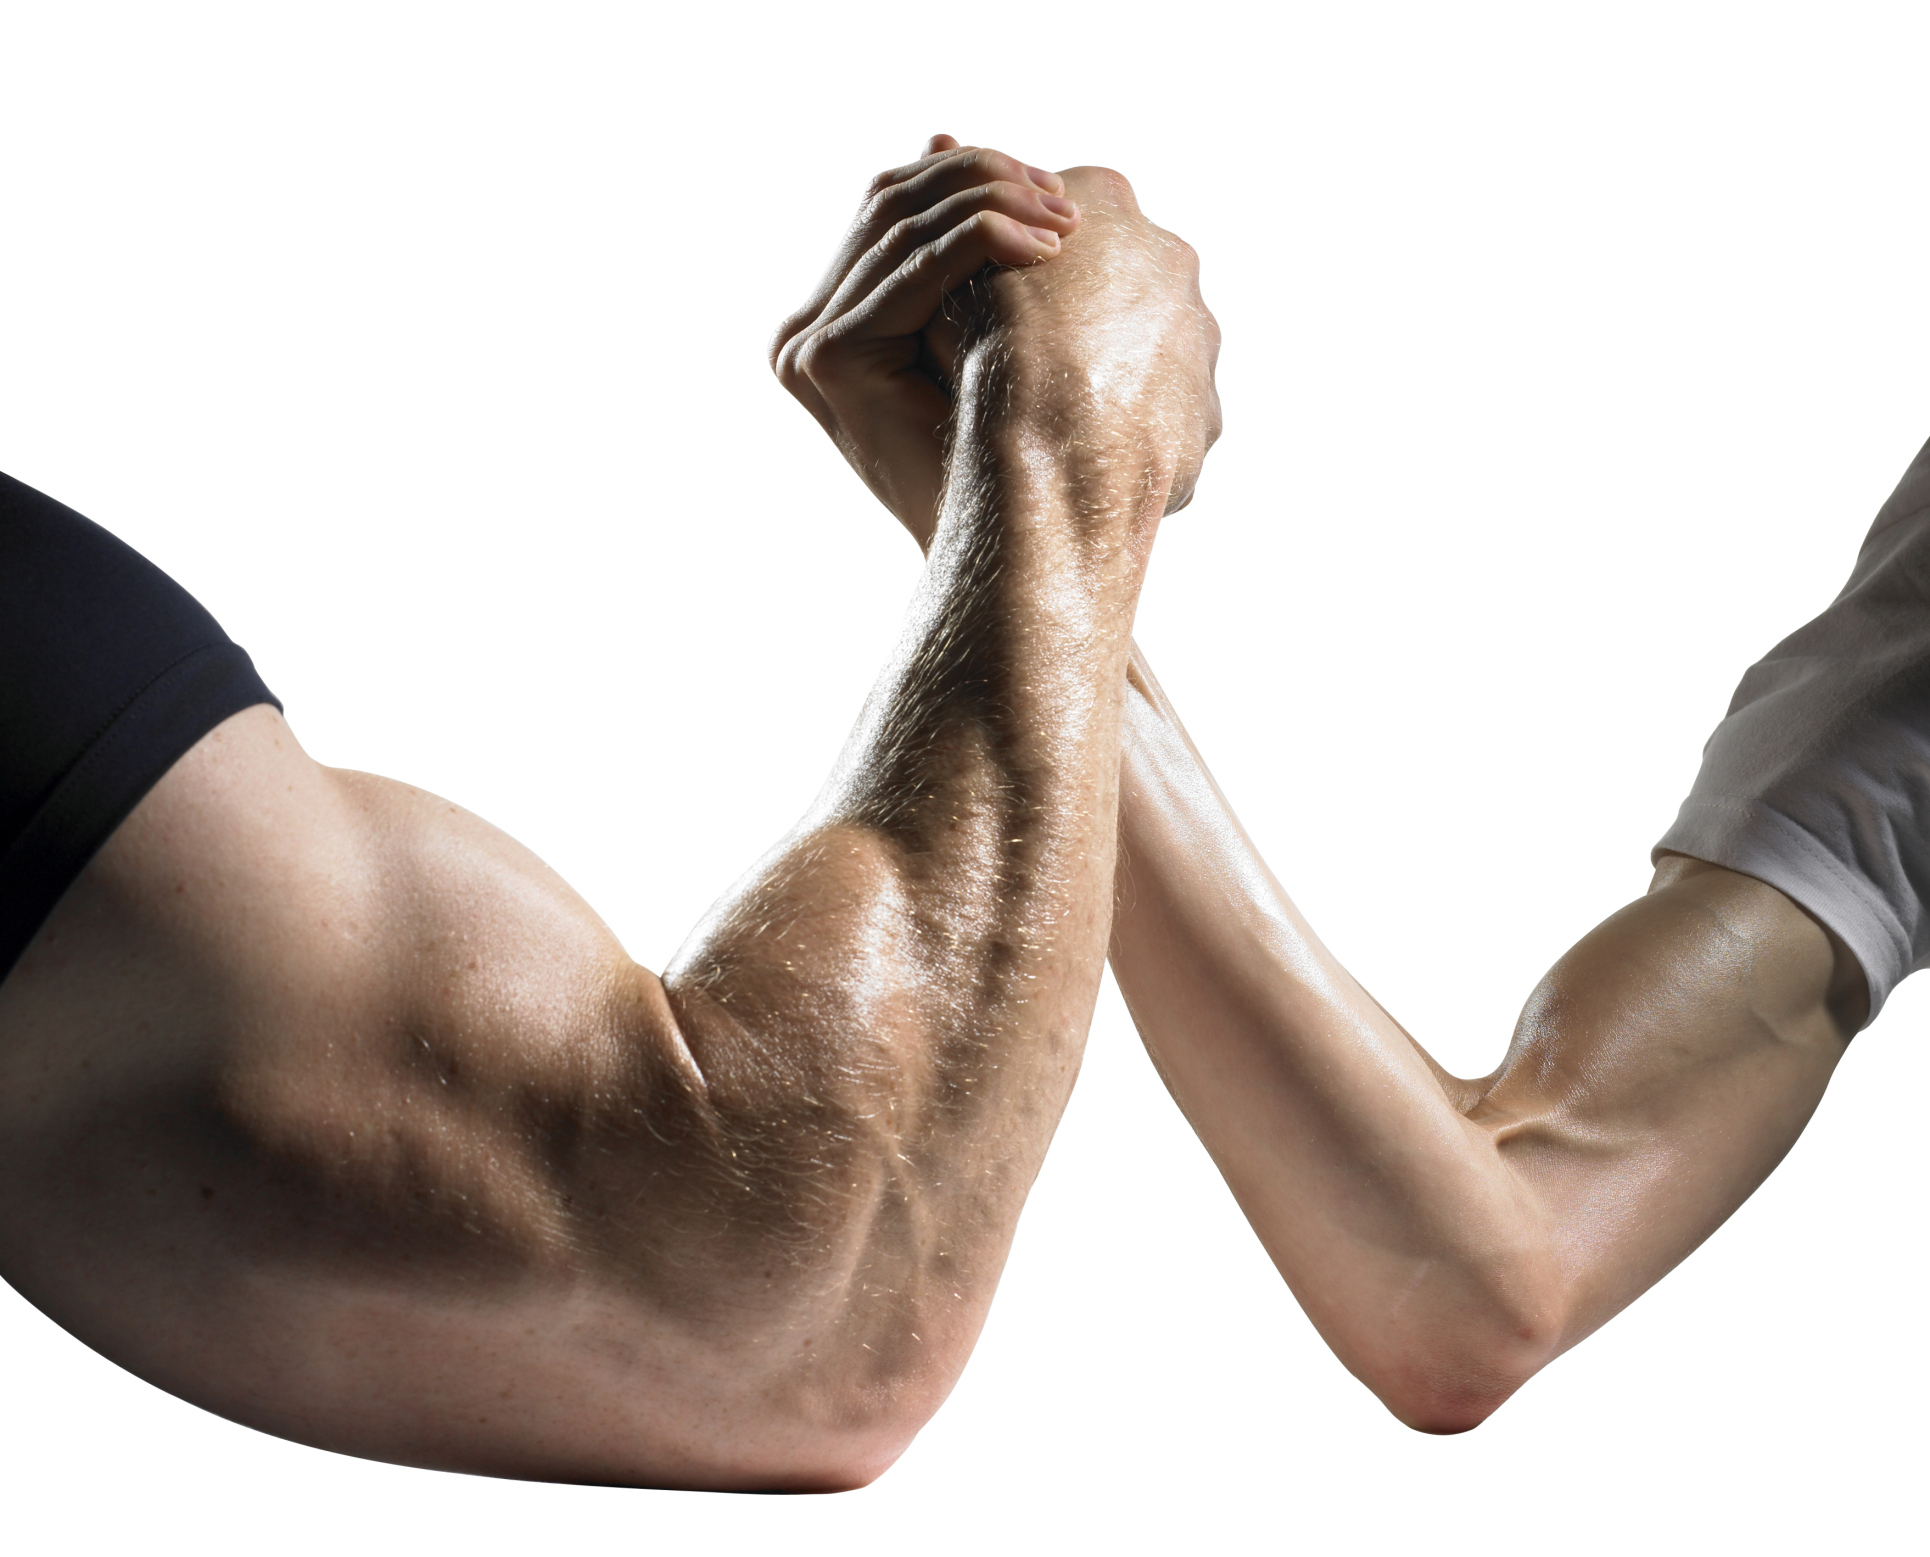 Every Arm Wrestling Match is a Tie – tallyphysics